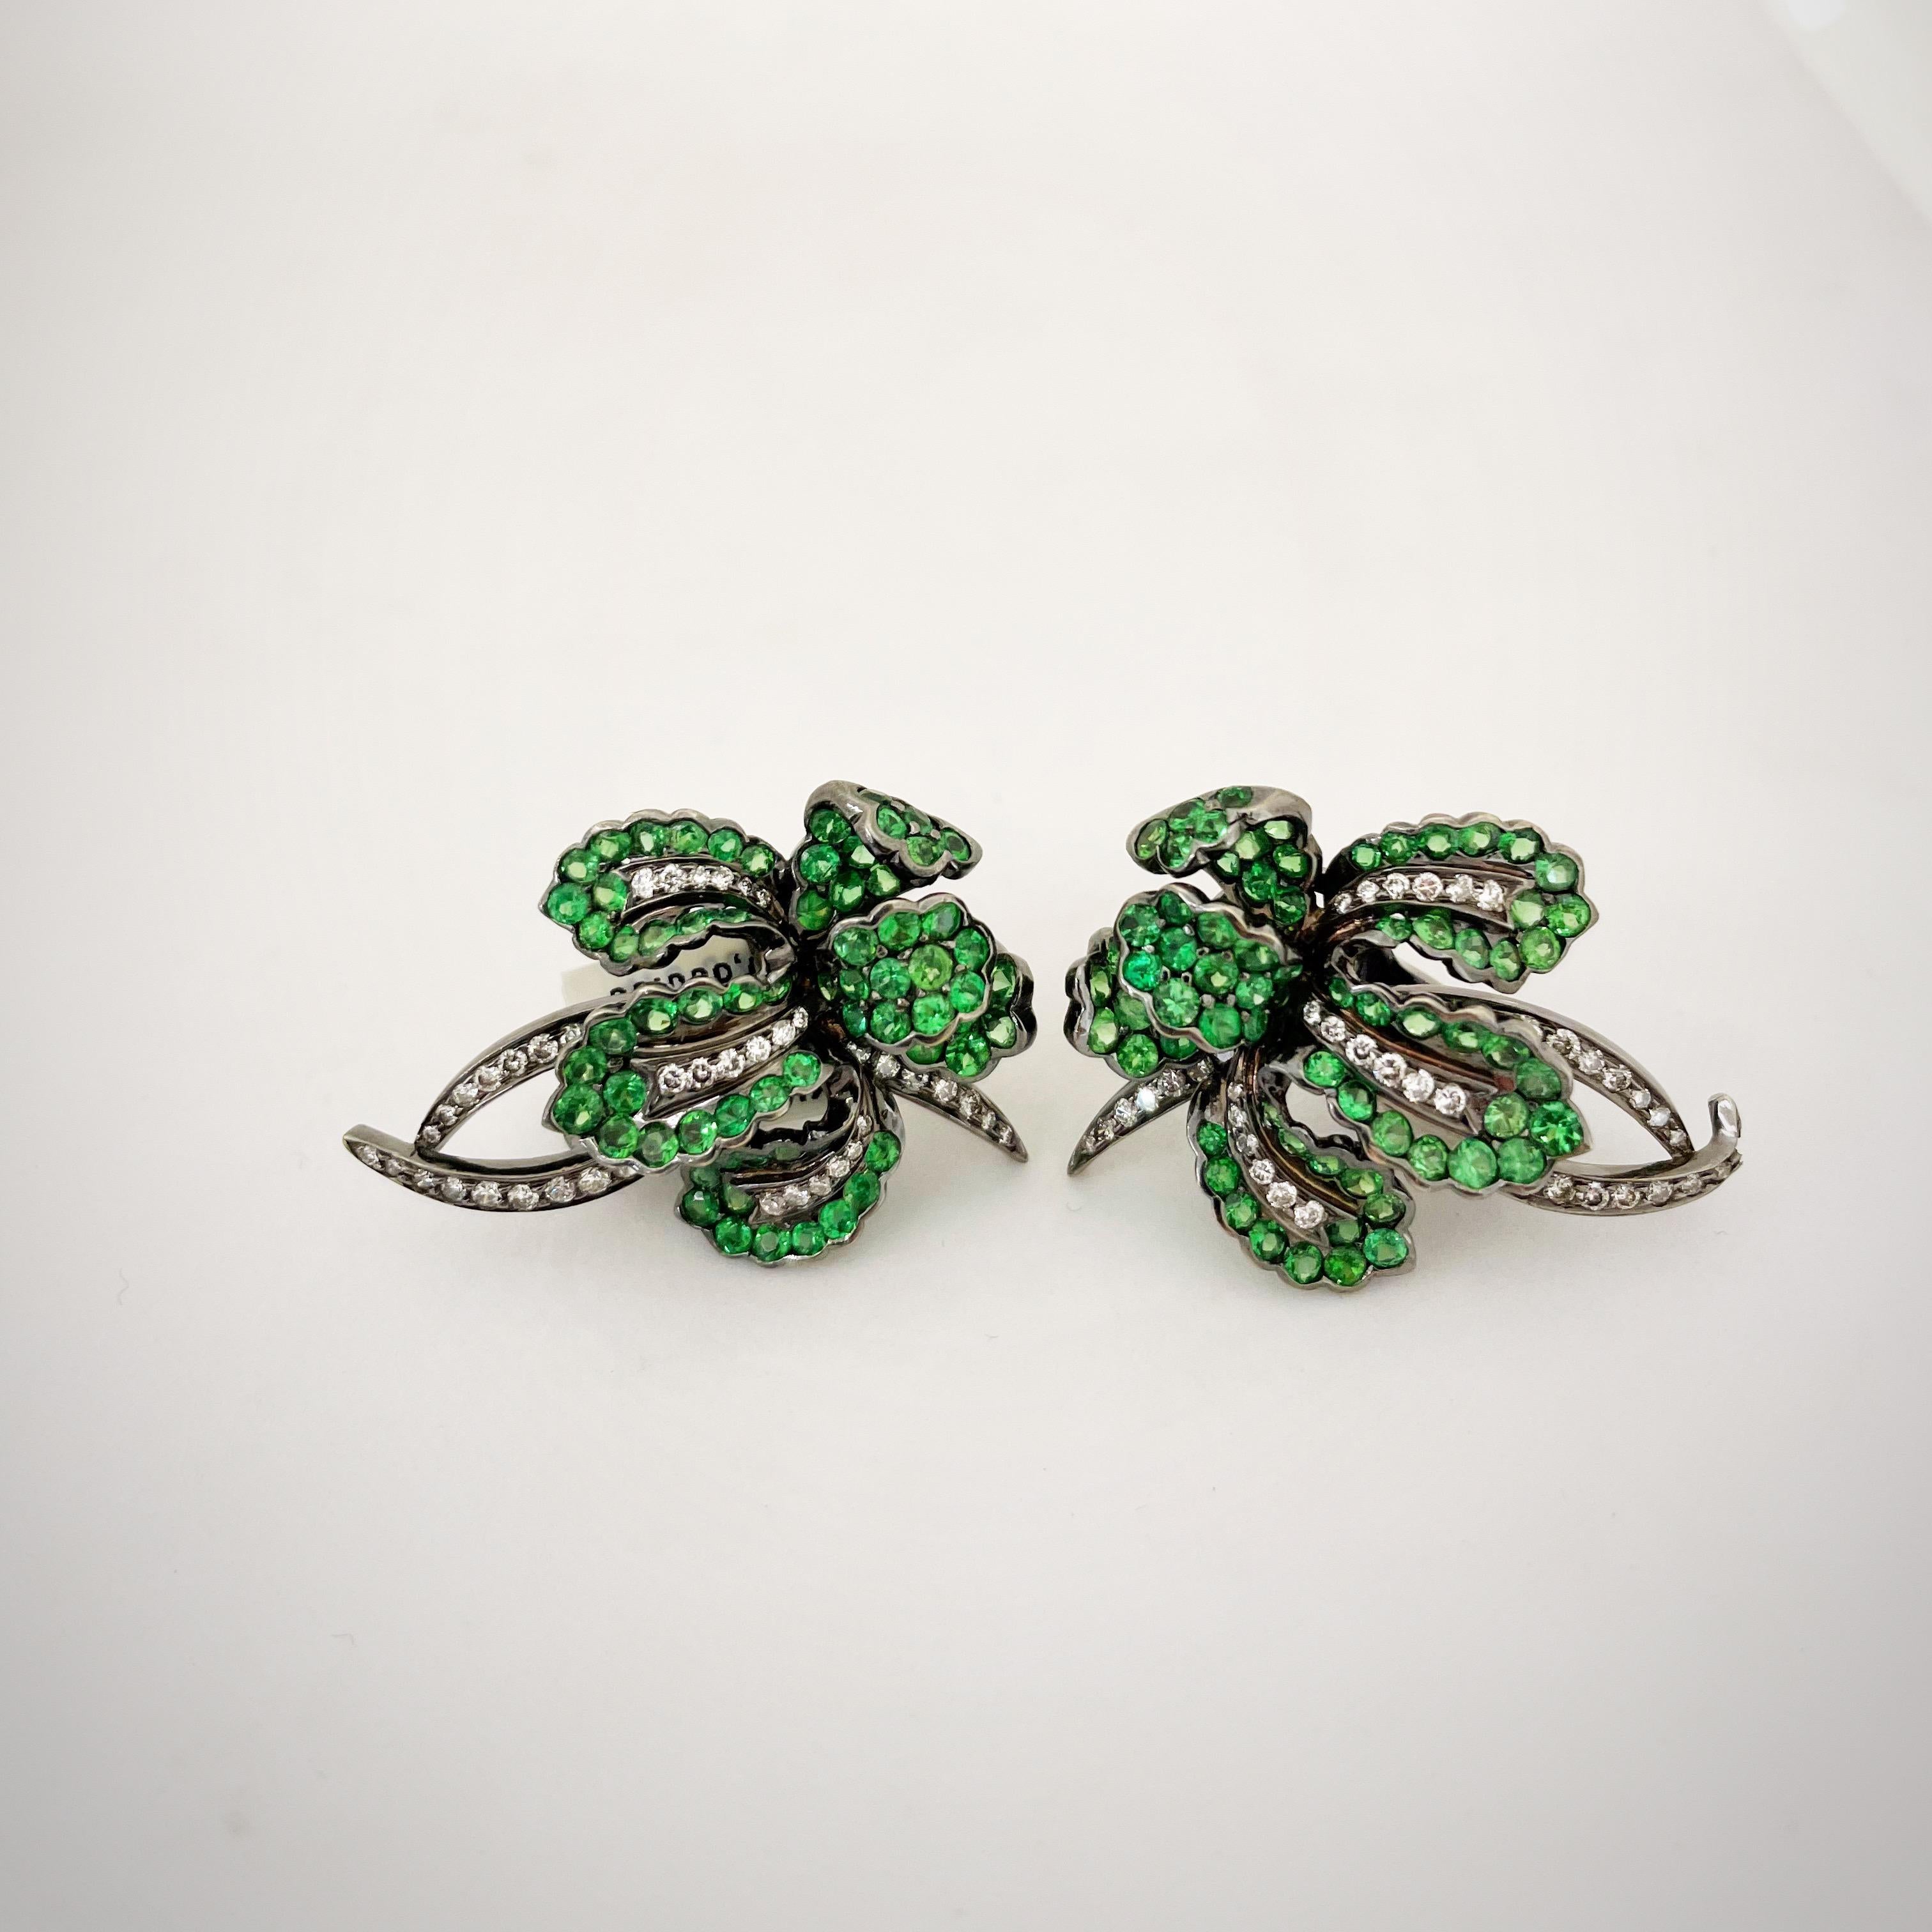 Contemporary Cellini 18kt Blackened Gold 1.10ct Diamond and 6.85ct Tsavorite Orchid Earrings For Sale